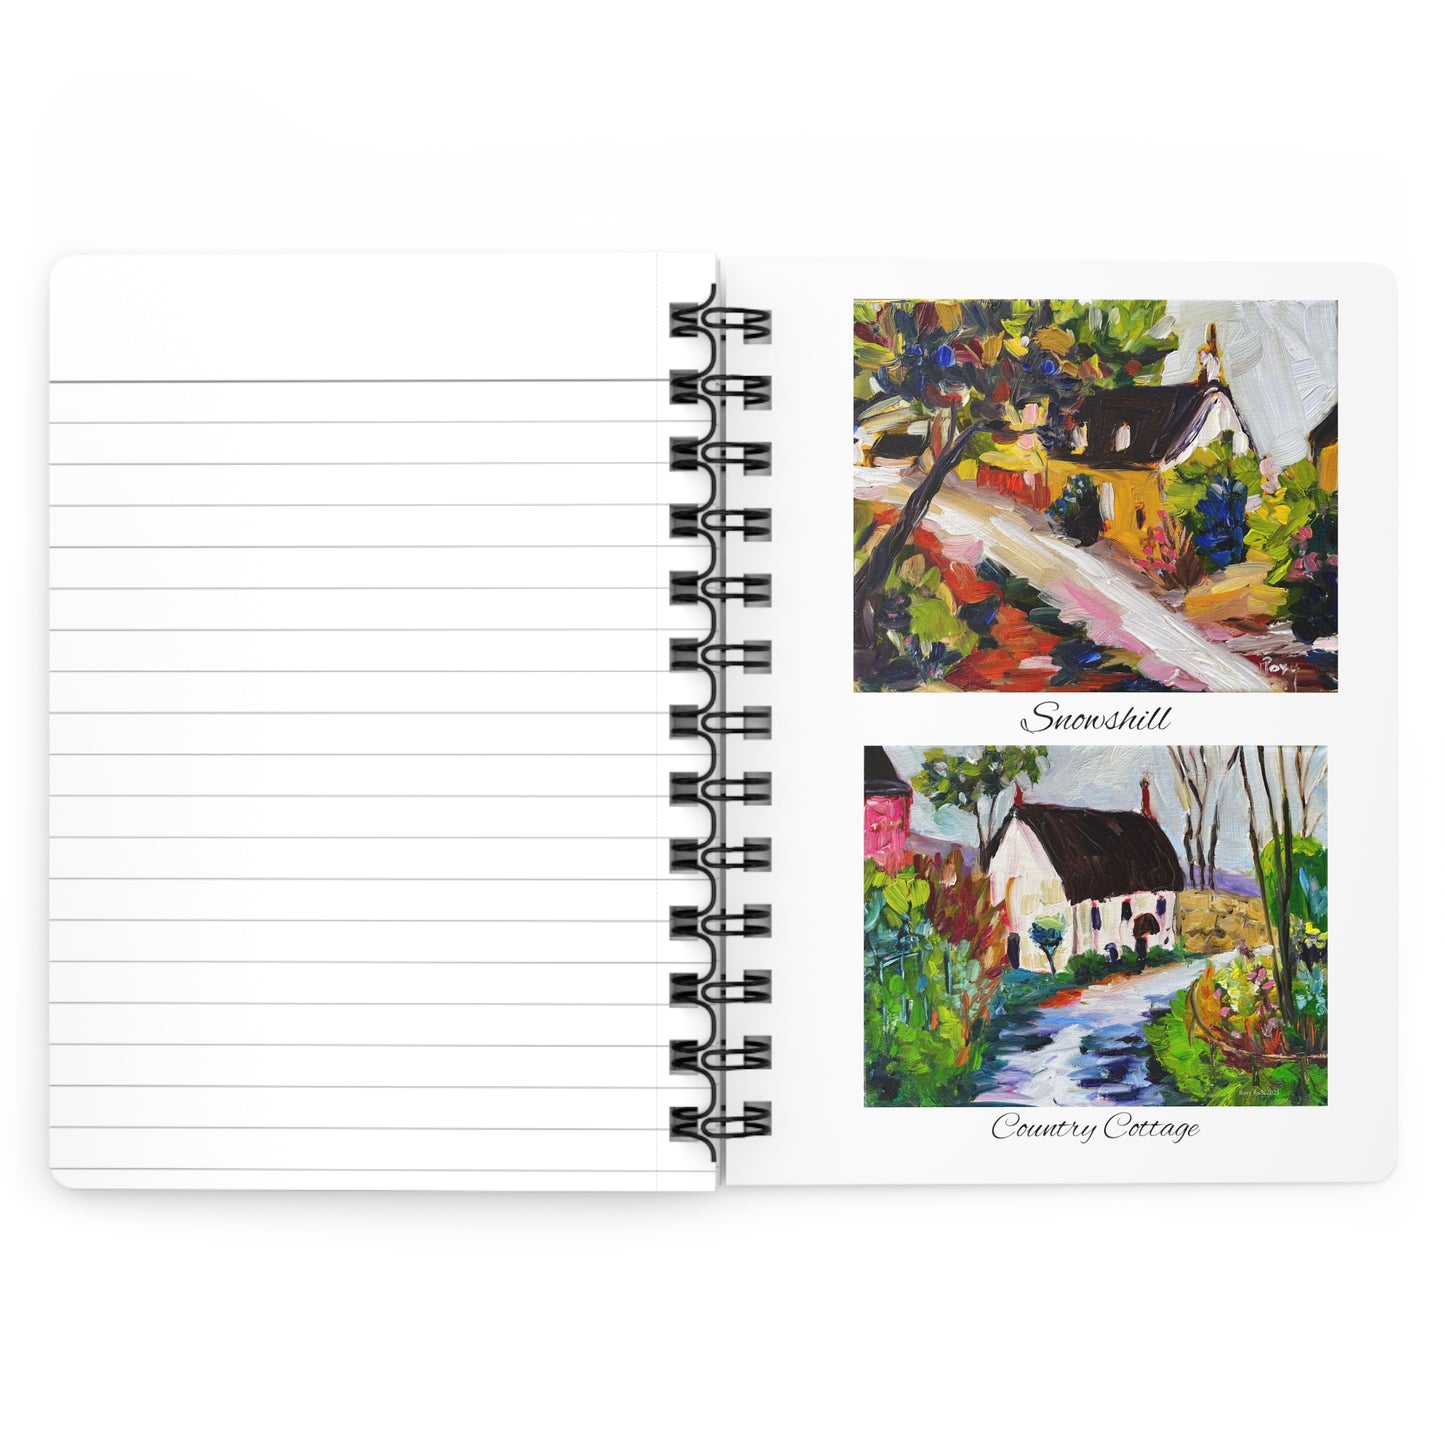 The Cotswolds #2-Colorful Paintings- Spiral Bound Journal